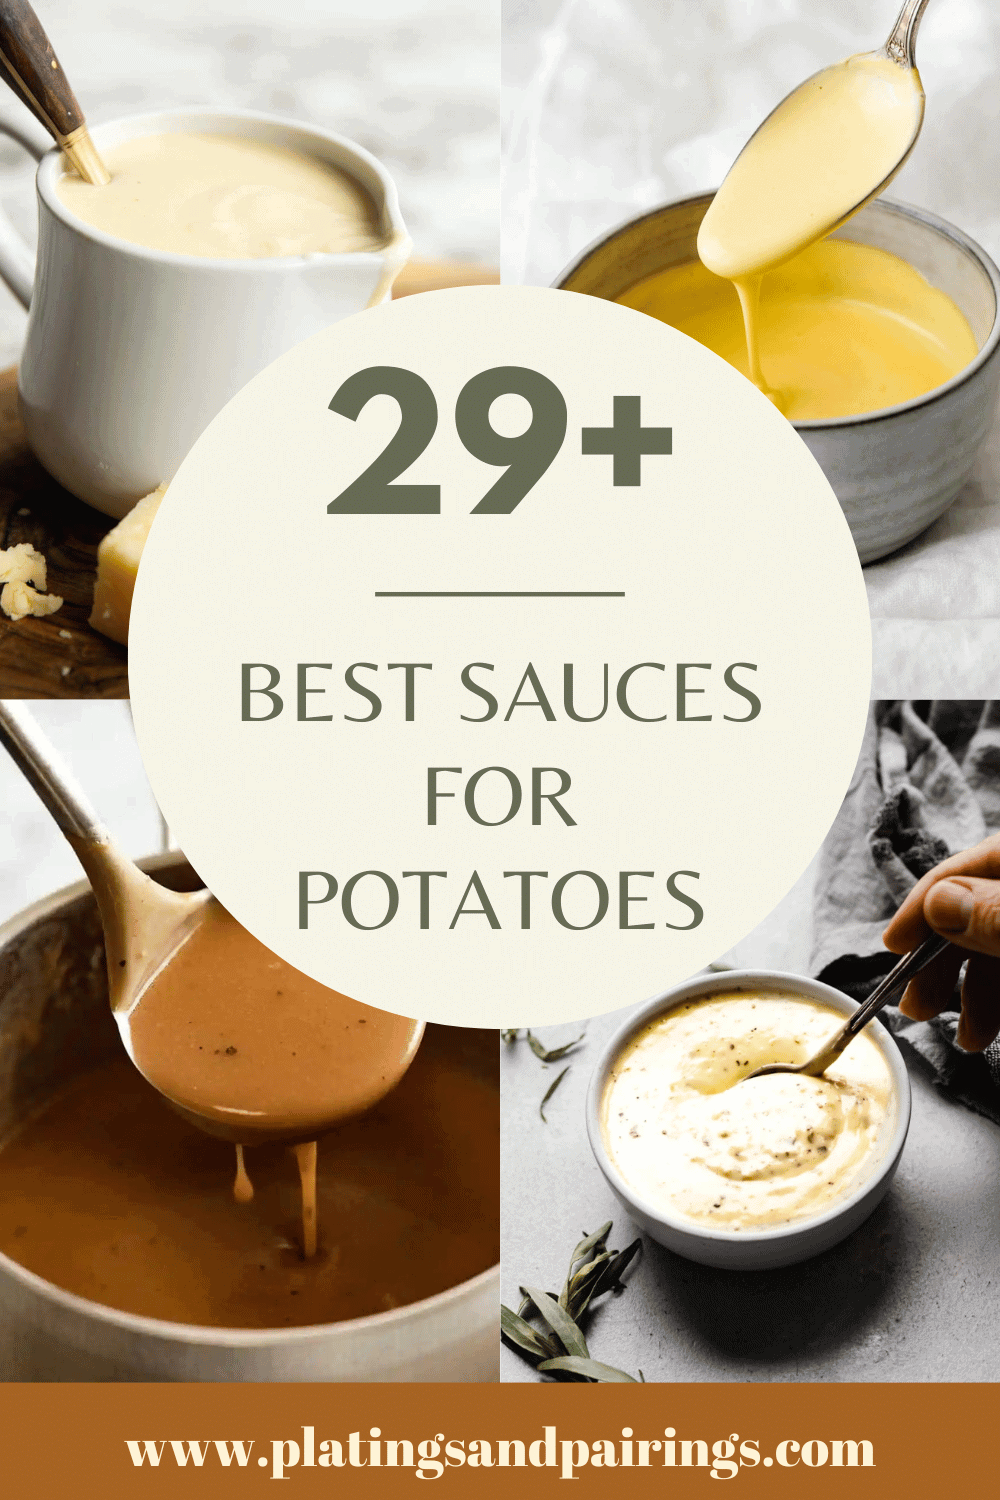 Collage of sauces for potatoes with text overlay.